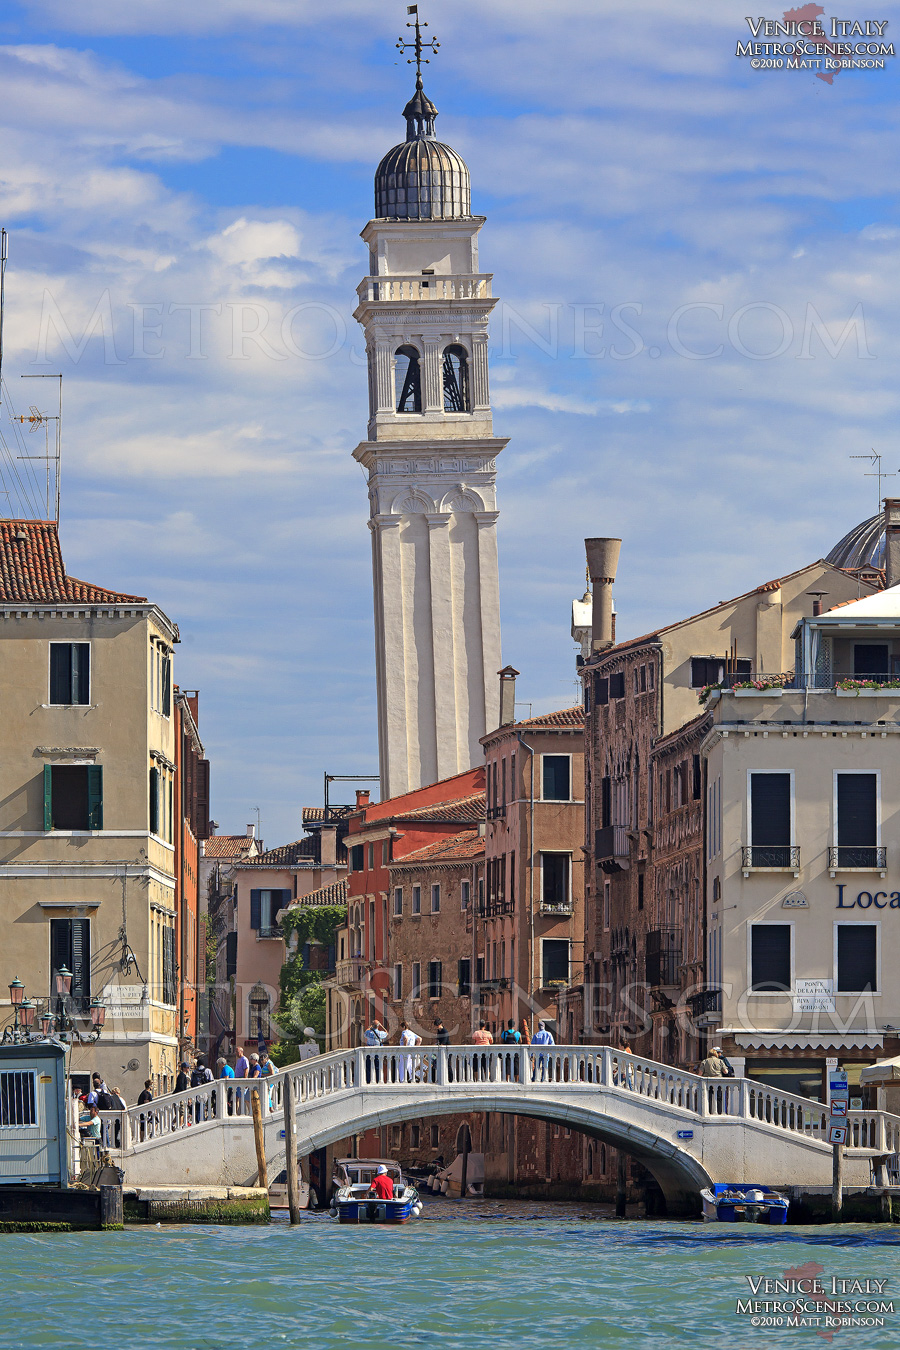 Leaning bell tower in Venice